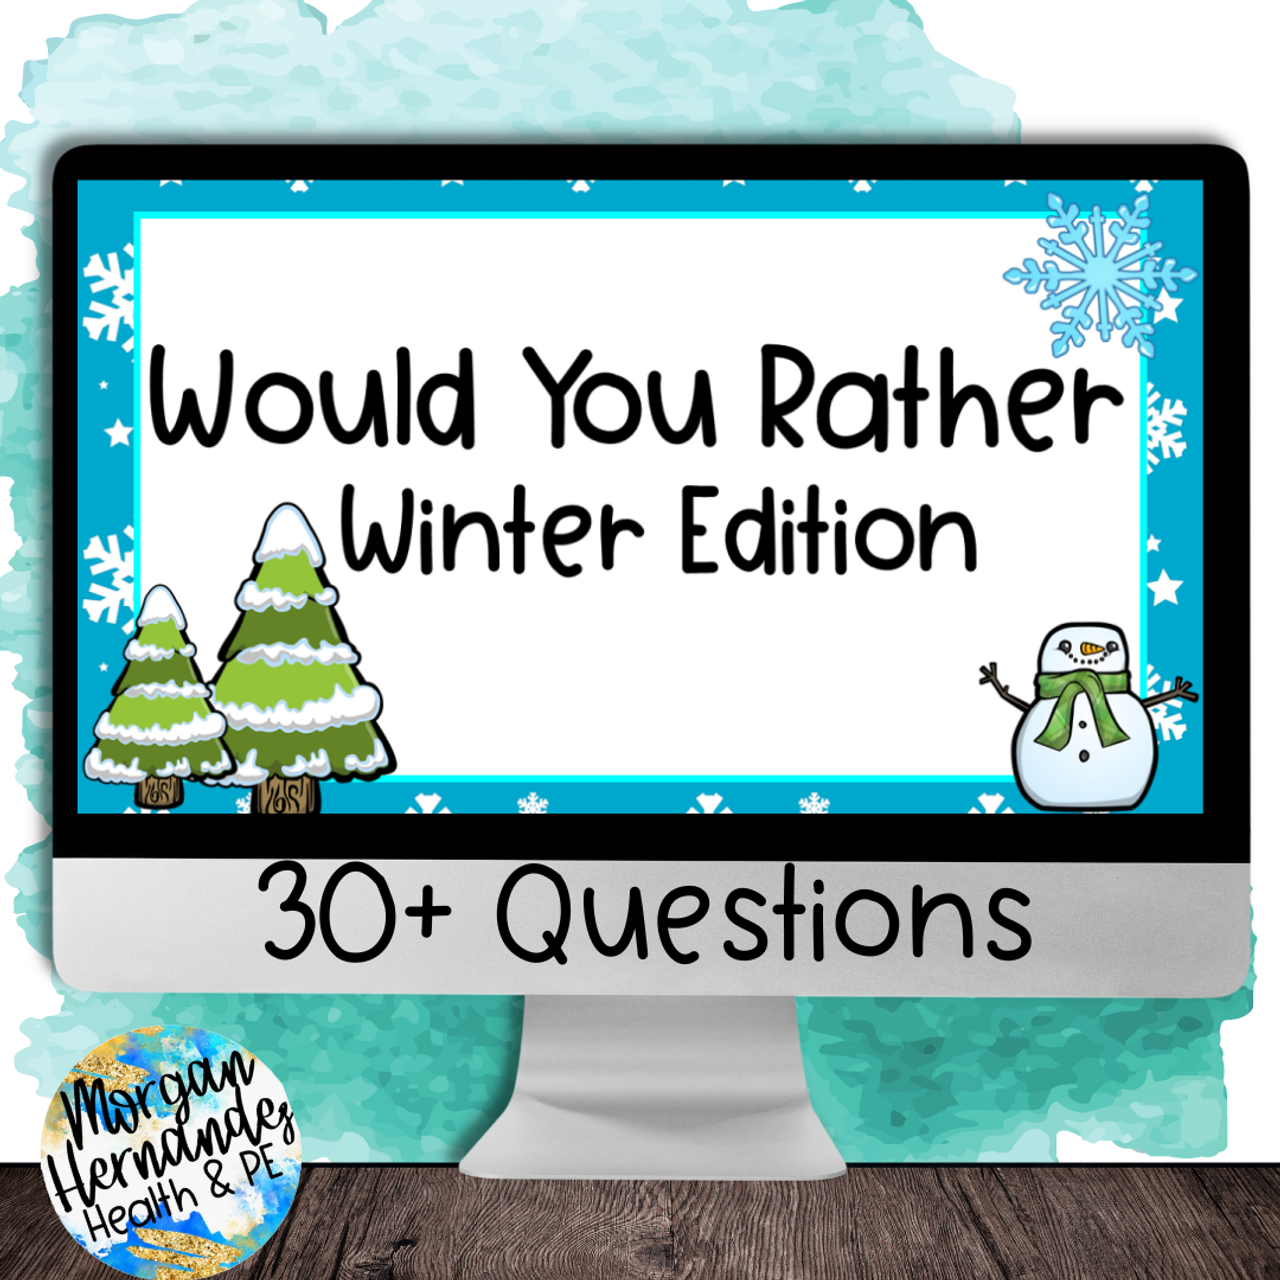 Would You Rather: Winter Edition